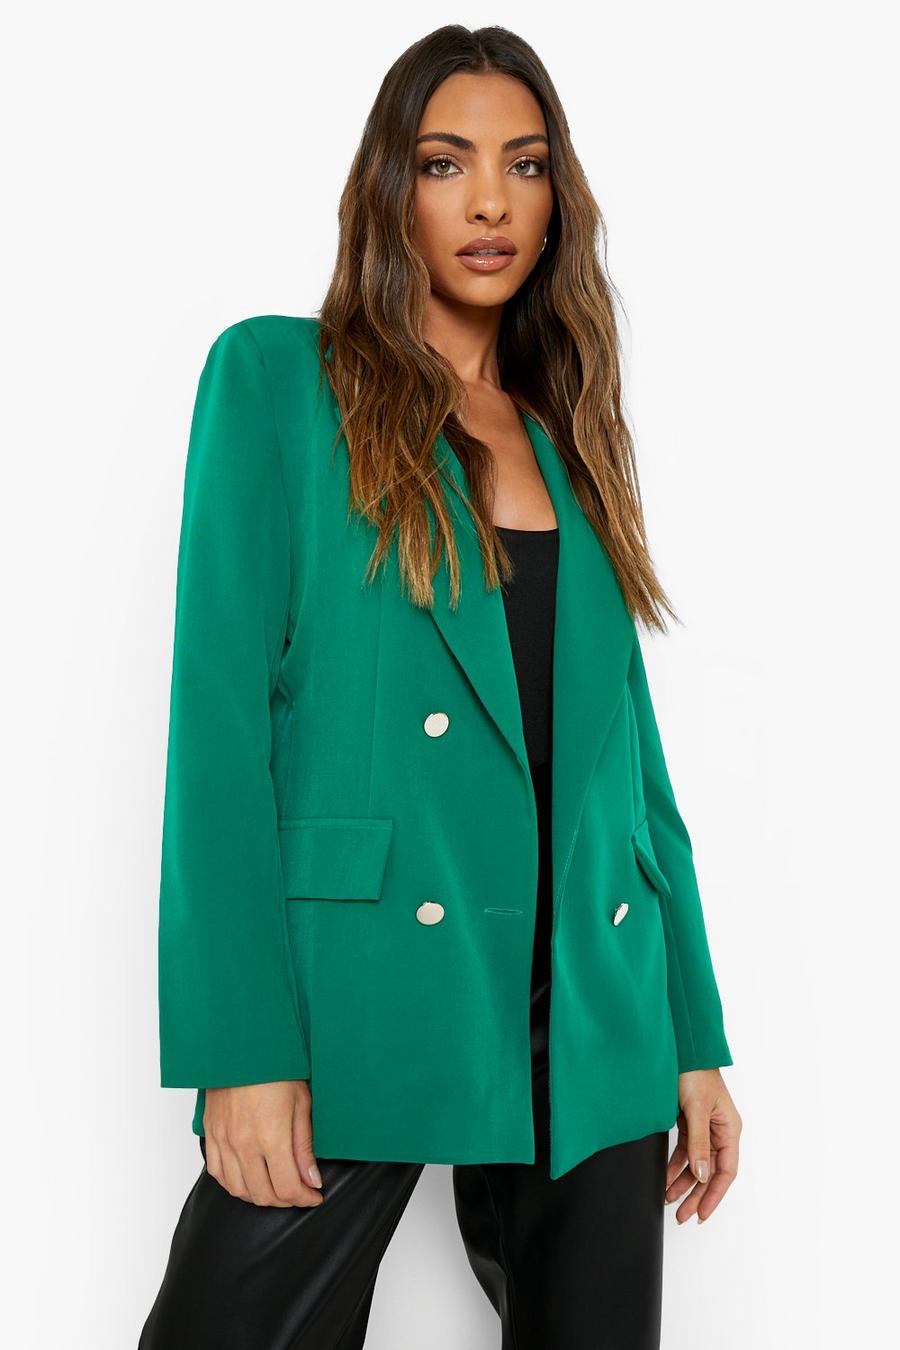 Bright green gerde Double Breasted Tailored Military Blazer